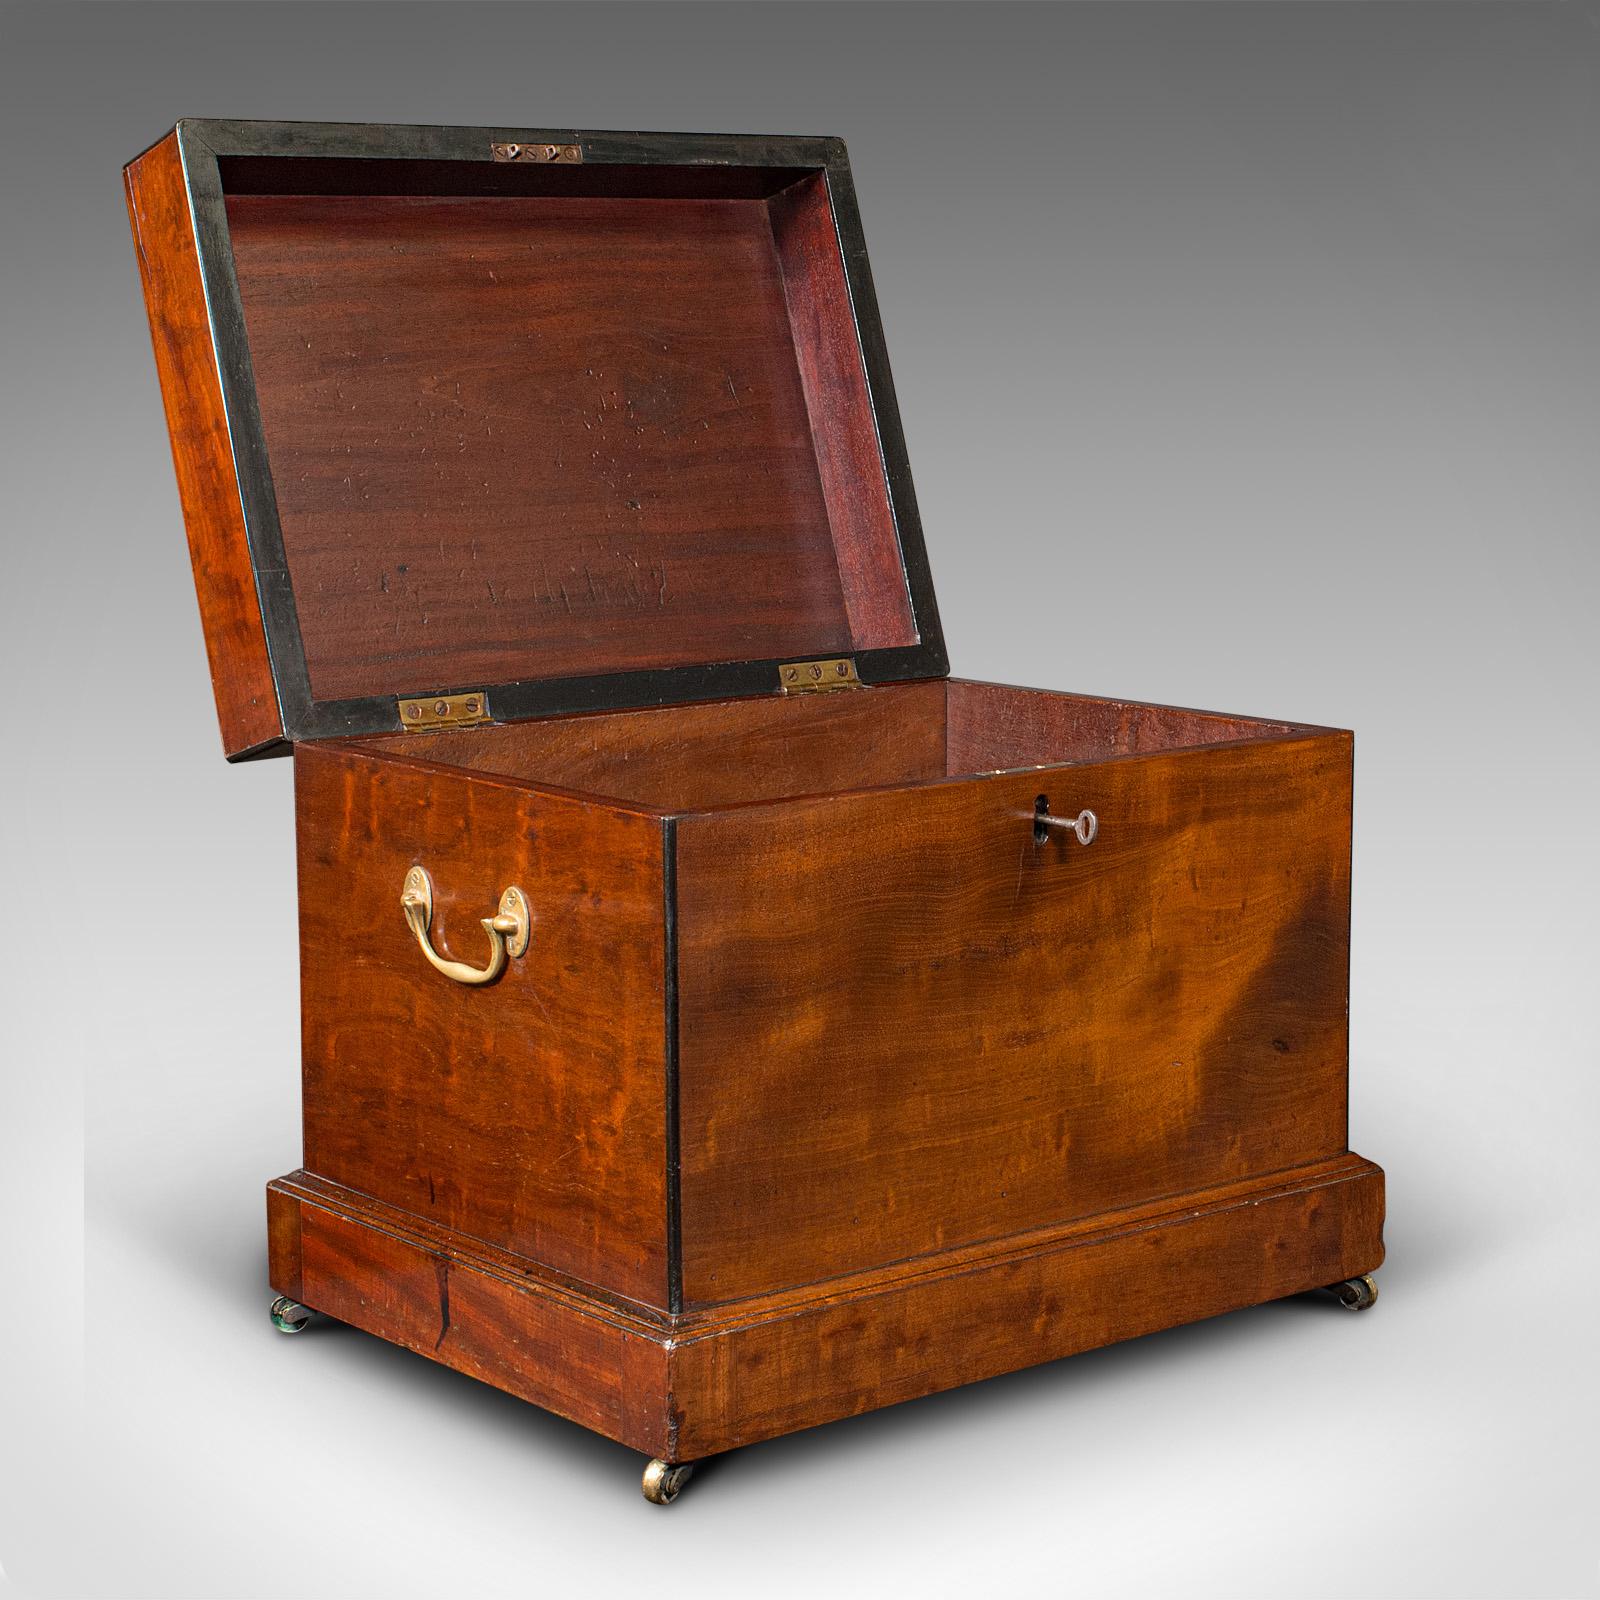 This is an antique silver storage case. An English, mahogany secure keepsake box, dating to the Georgian period, circa 1800.

Superb Georgian craftsmanship for storing treasured items.
Displays a desirable aged patina and in good order.
Select